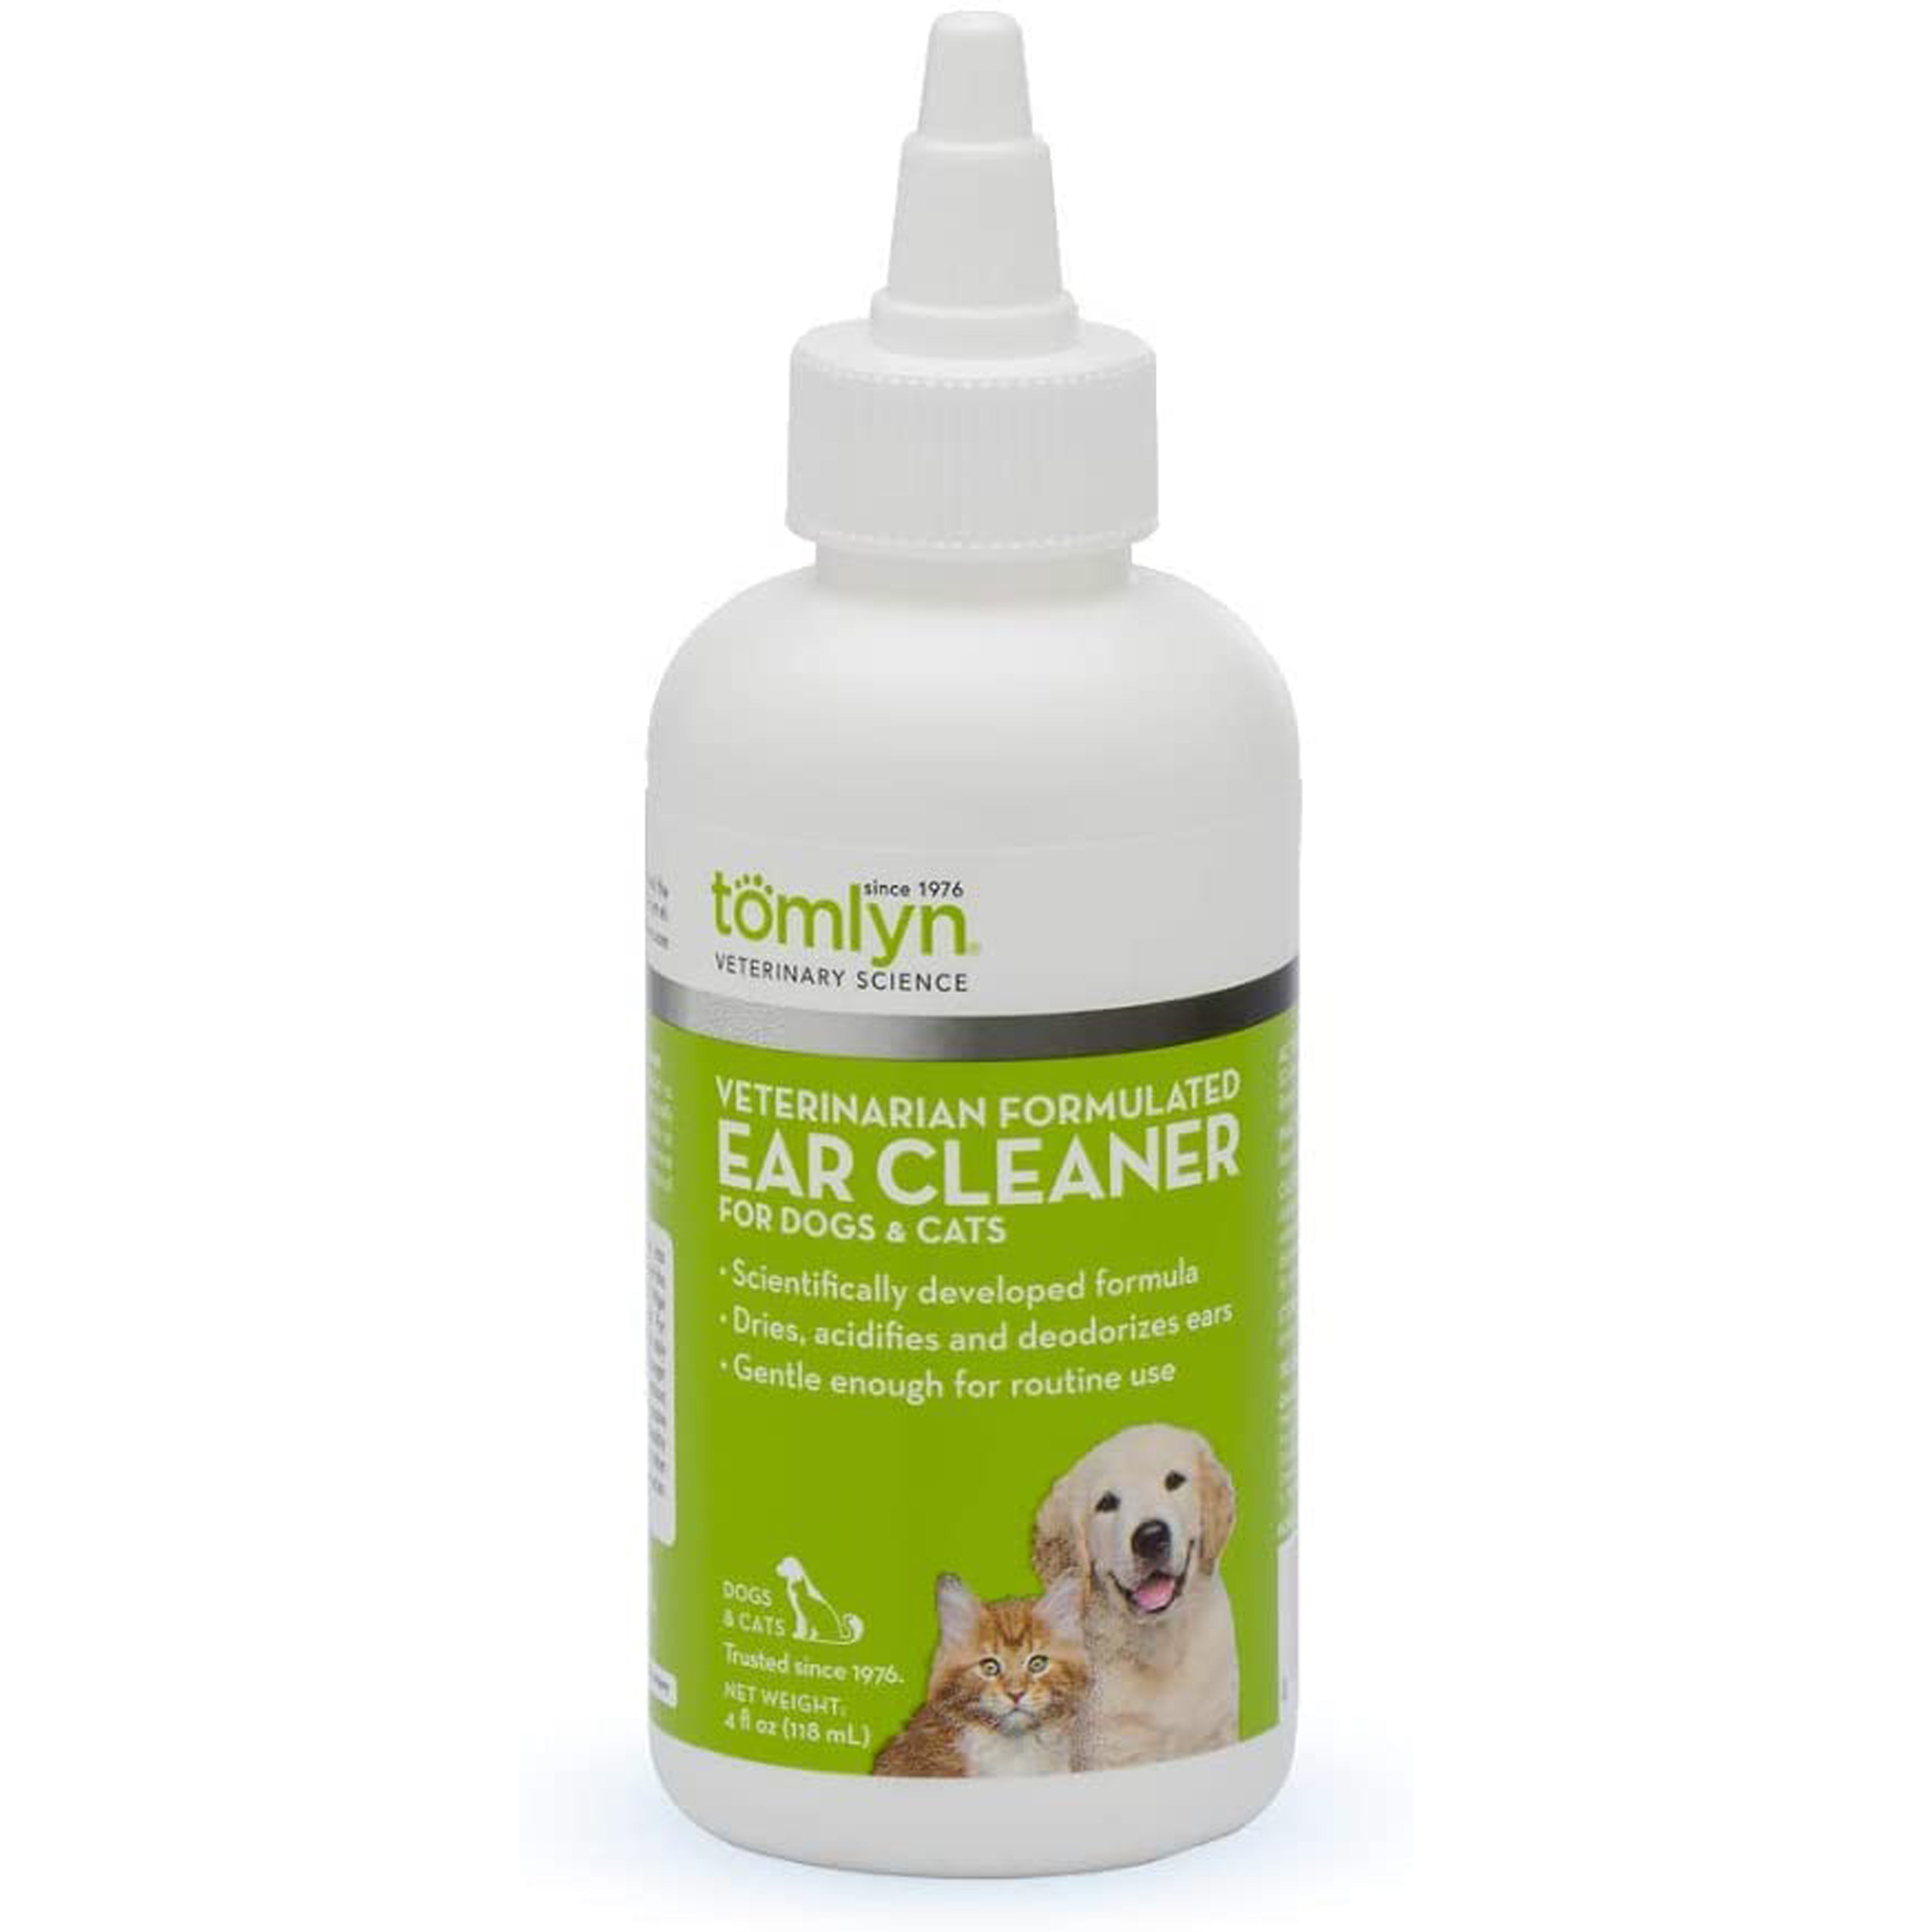 Tomlyn Veterinarian Formulated Ear Cleaner for Dogs & Cats 4 Fl. oz